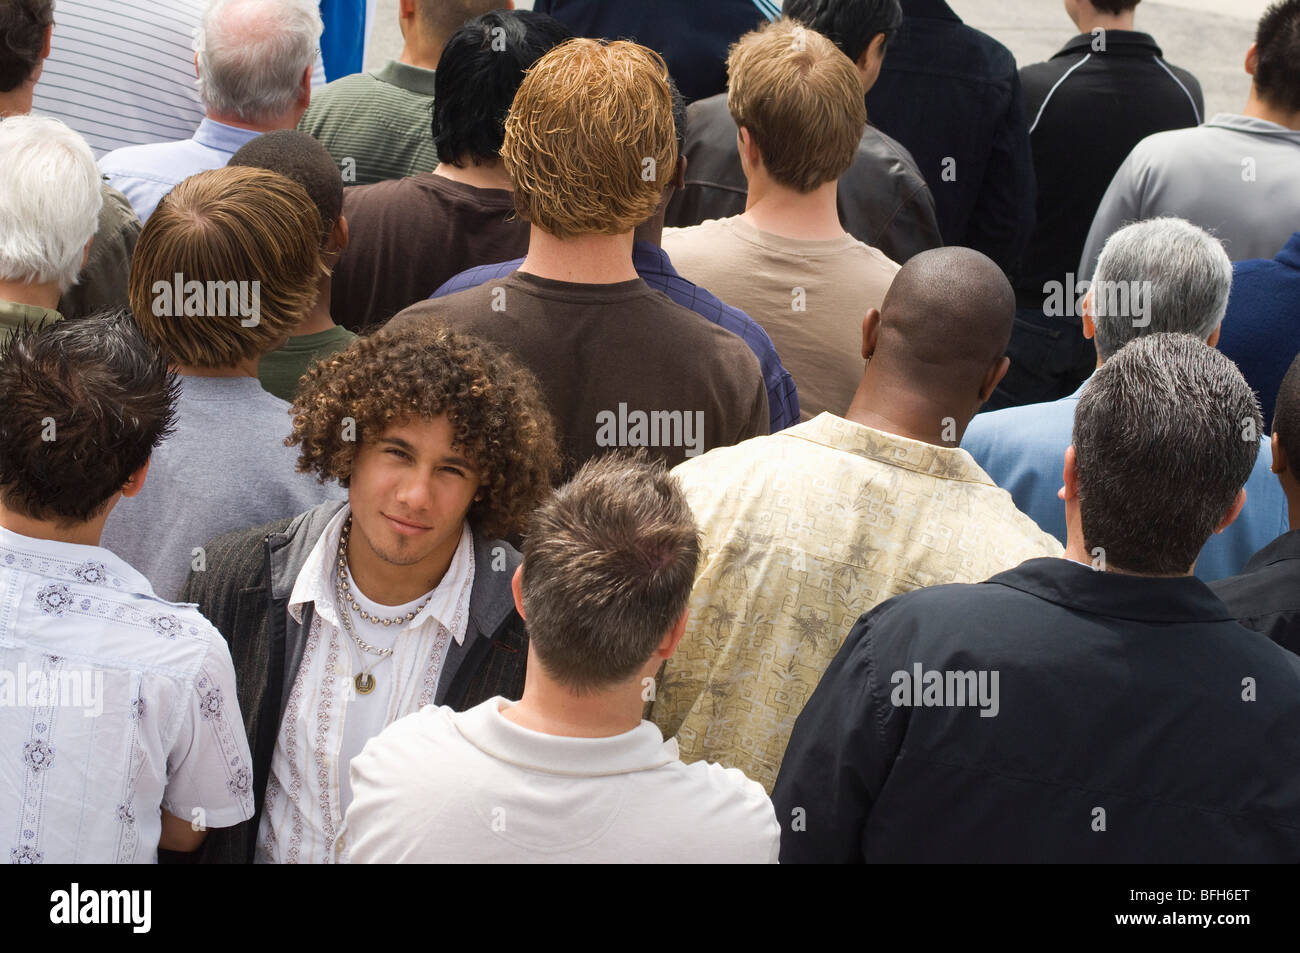 Young man standing in crowd Stock Photo